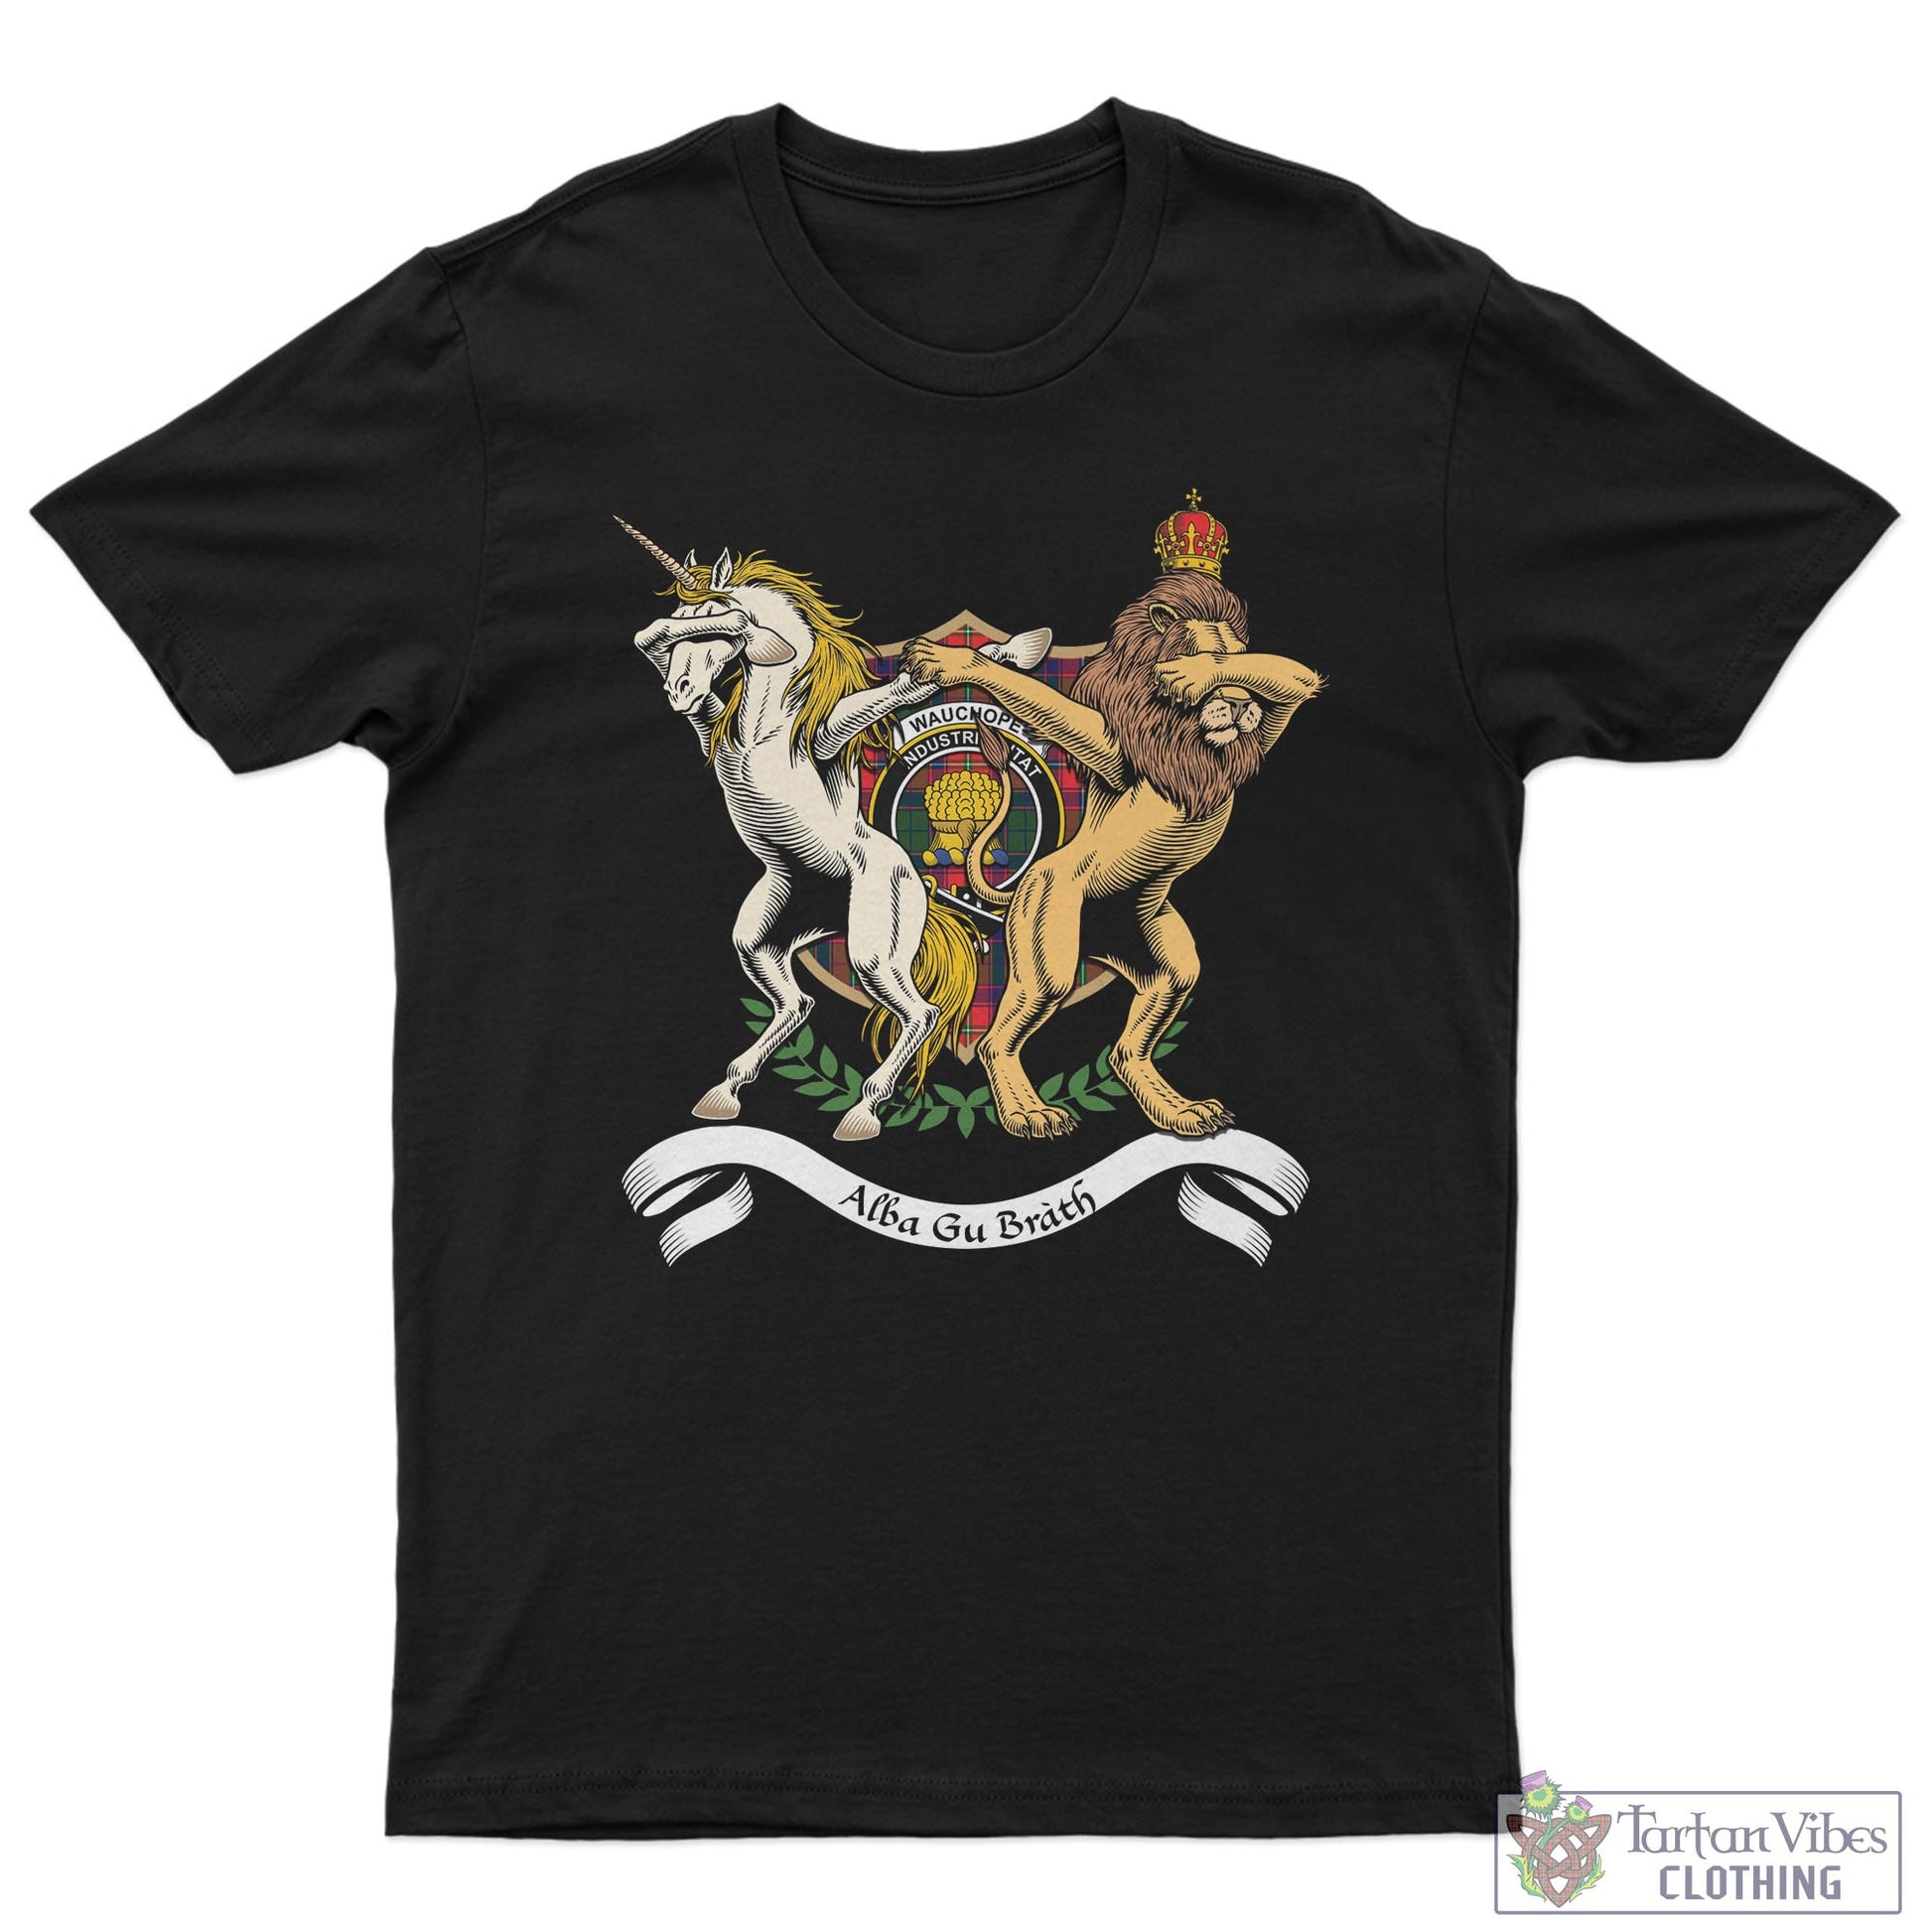 Tartan Vibes Clothing Wauchope Family Crest Cotton Men's T-Shirt with Scotland Royal Coat Of Arm Funny Style